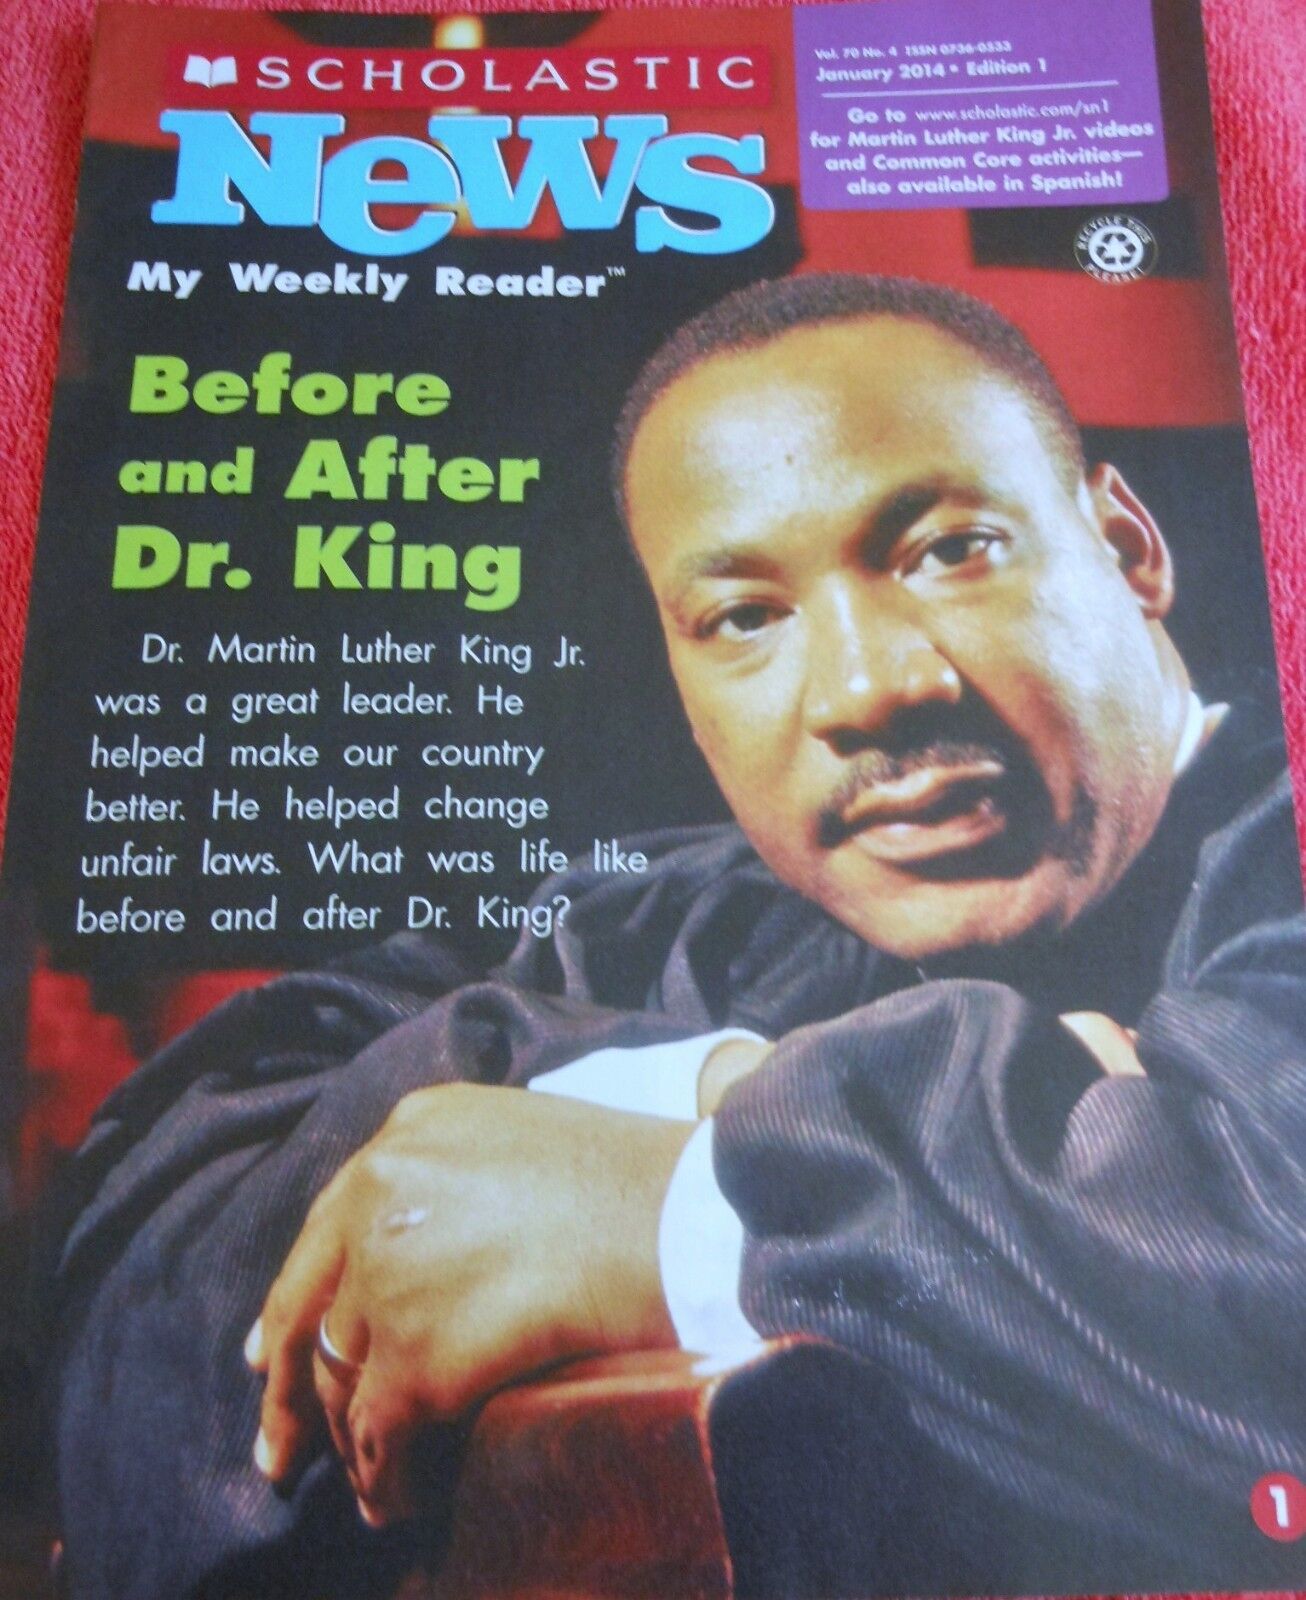 SCHOLASTIC NEWS WEEKLY READER JANUARY 2014 MARTIN LUTHER KING JR. GRADE 1